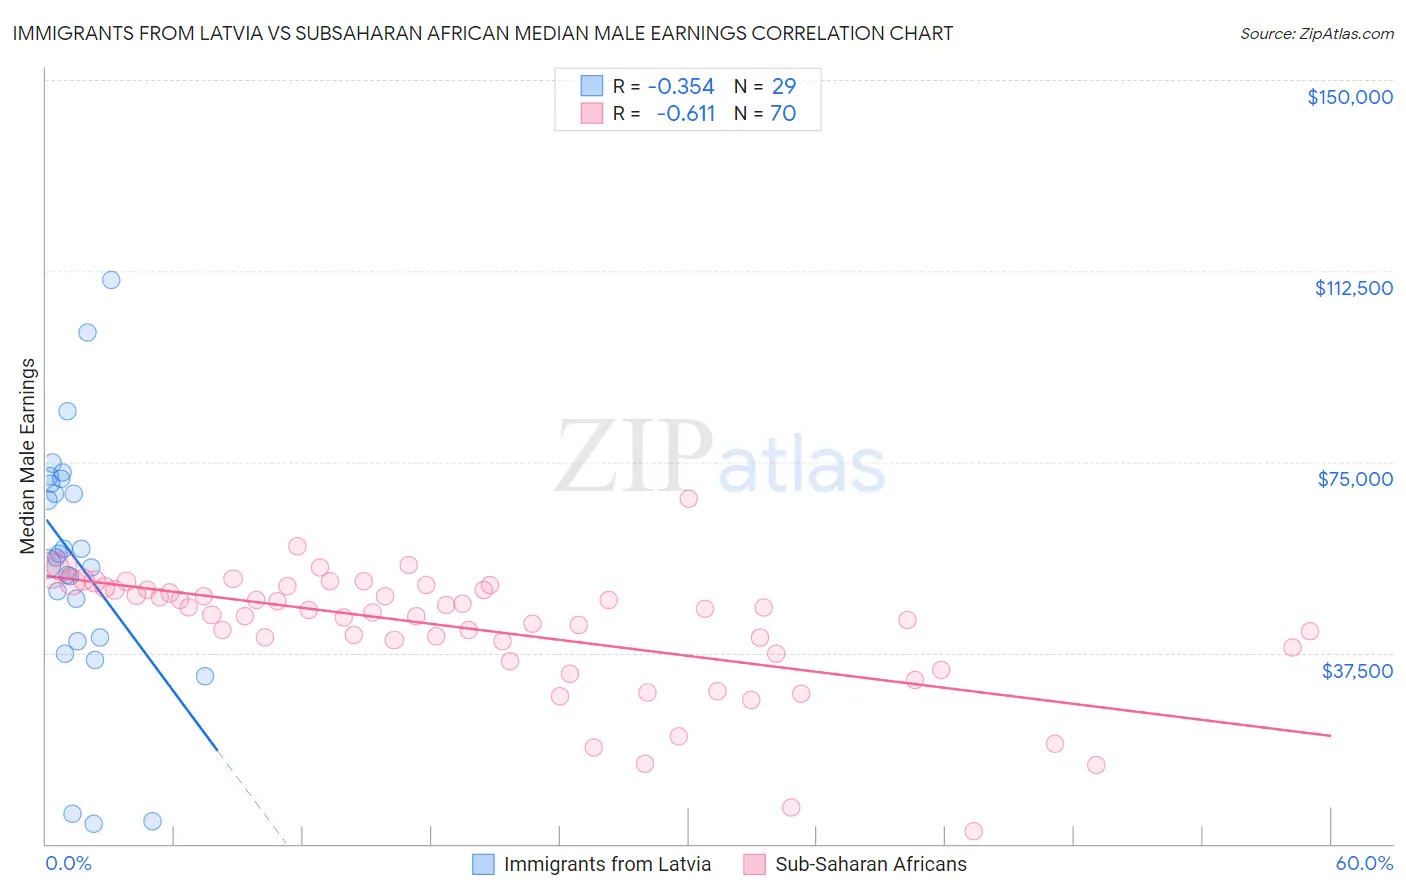 Immigrants from Latvia vs Subsaharan African Median Male Earnings